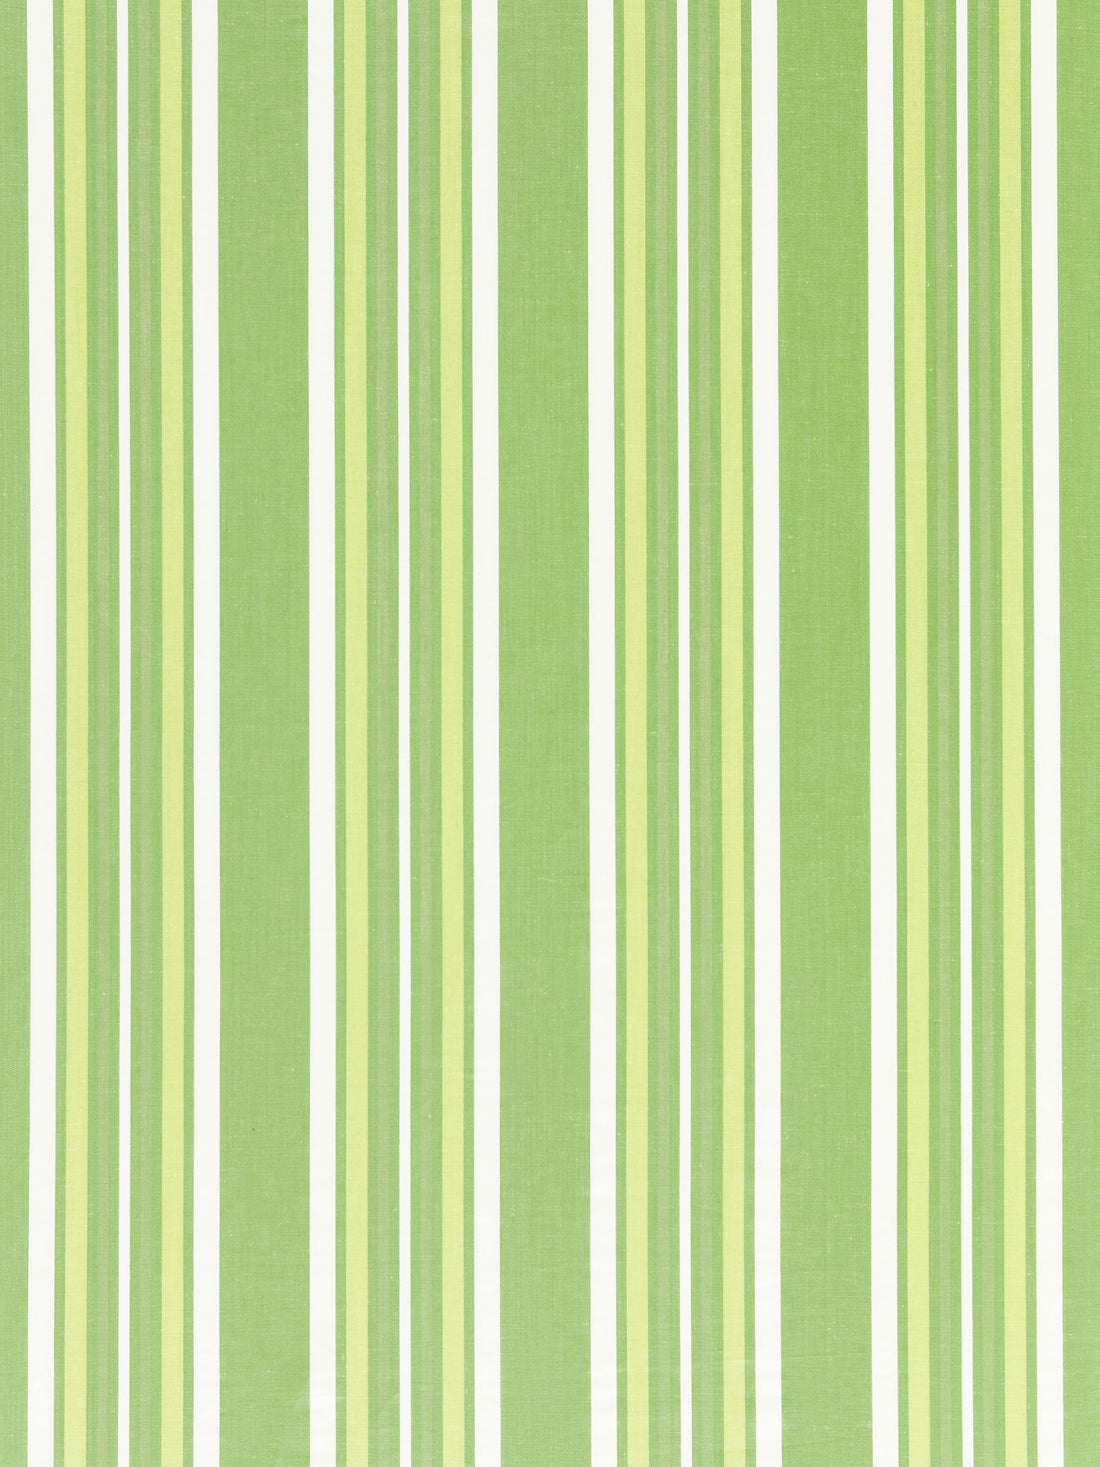 Strada Stripe fabric in jade color - pattern number SC 000327220 - by Scalamandre in the Scalamandre Fabrics Book 1 collection